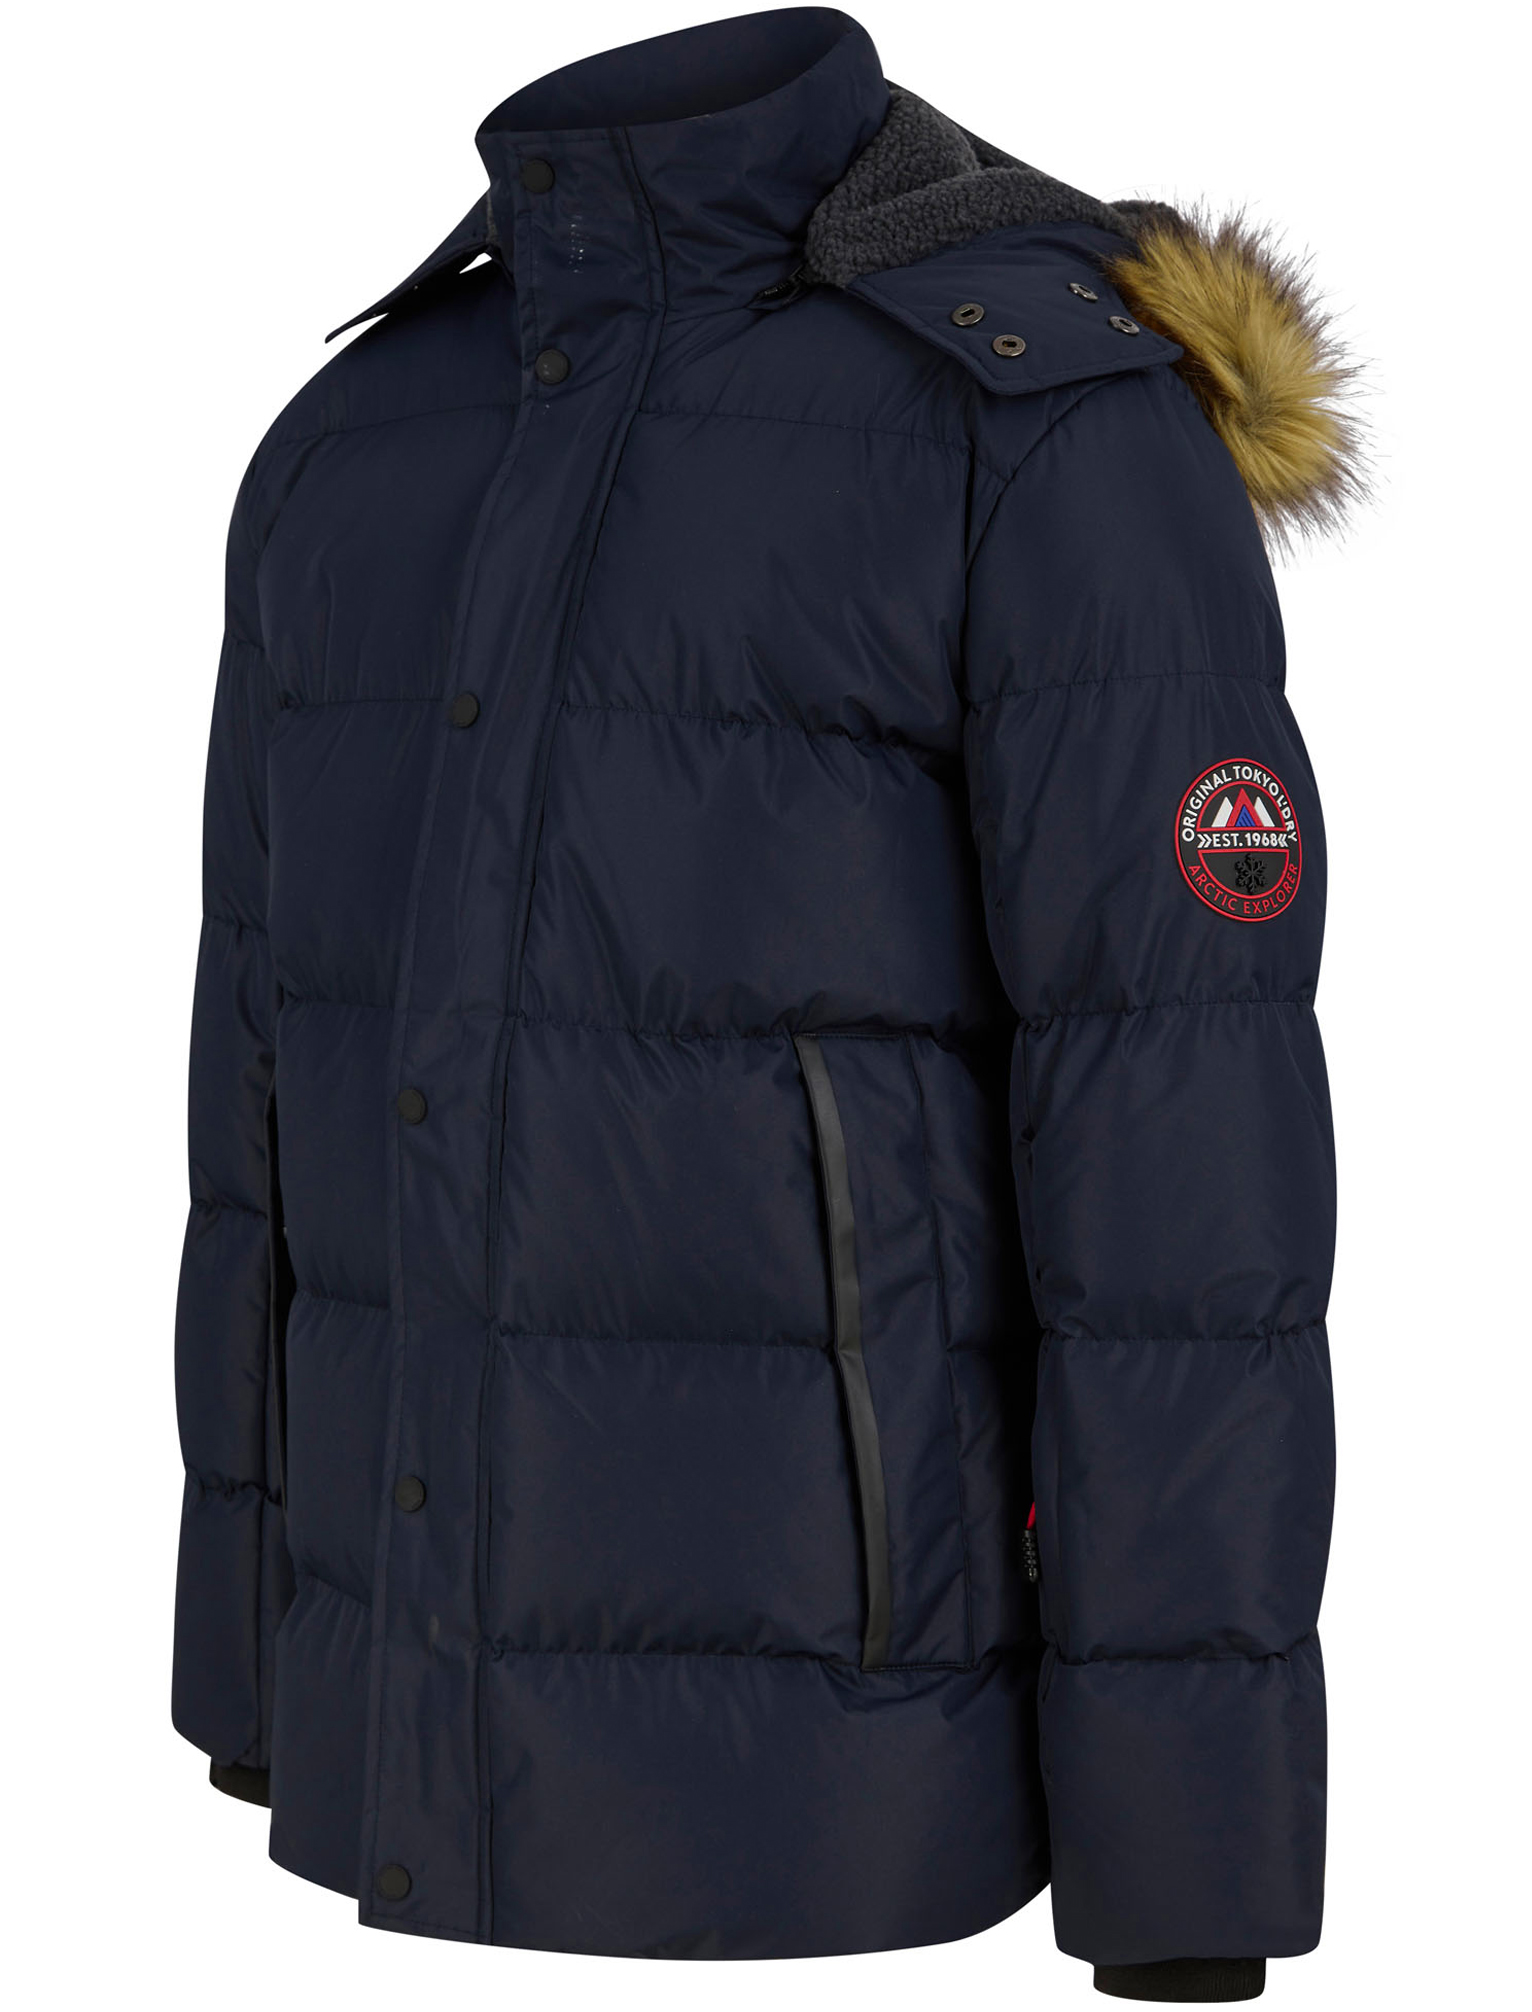 WARM PADDED WASHABLE QUILTED JACKET